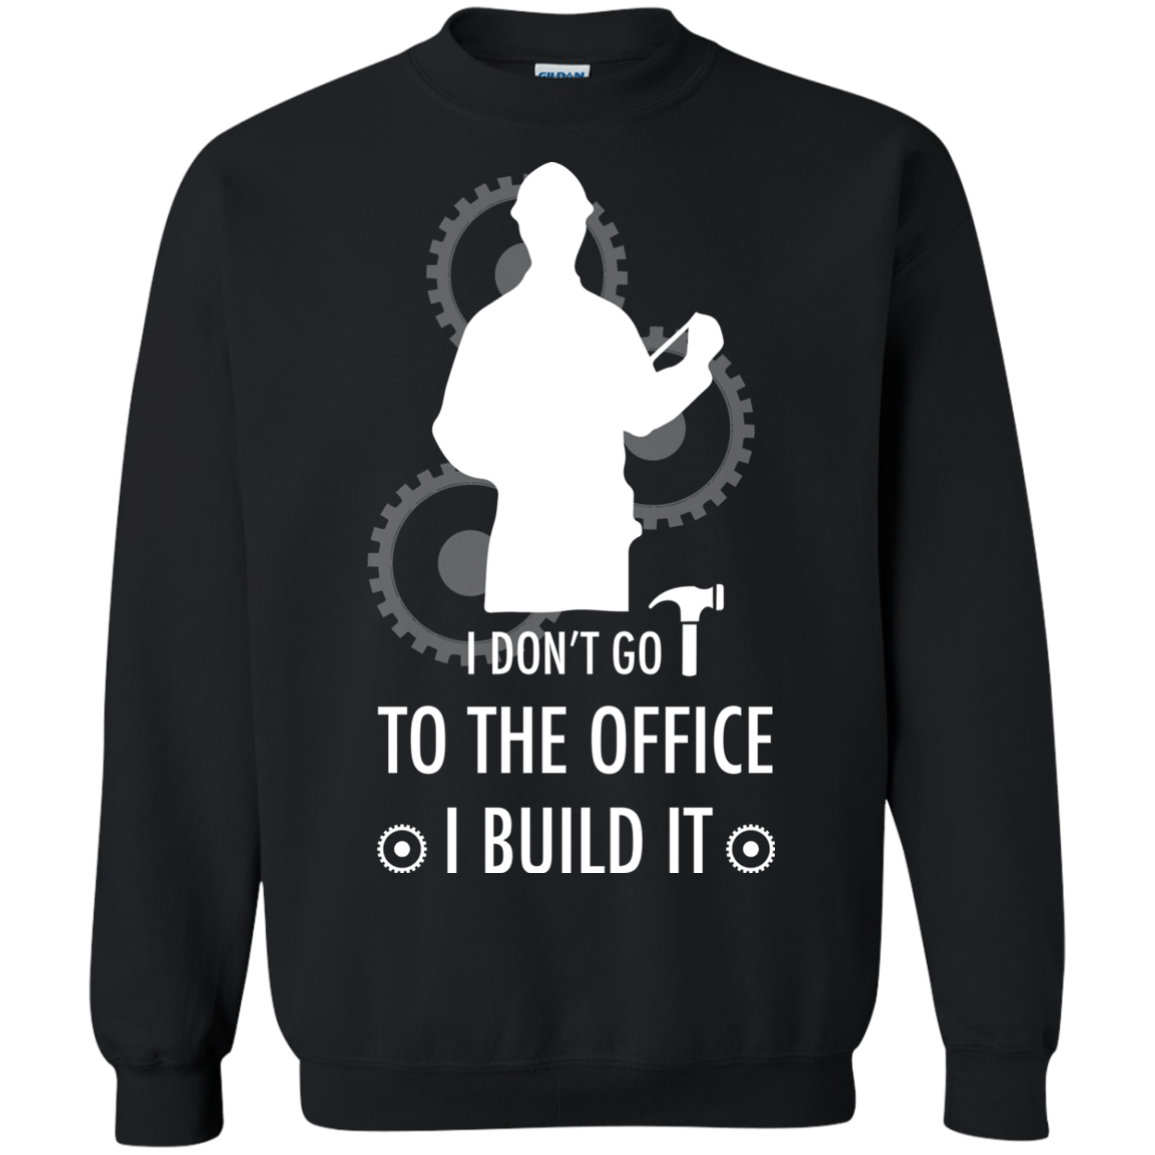 Engineer T-shirt I Don't Go To The Office I Build It